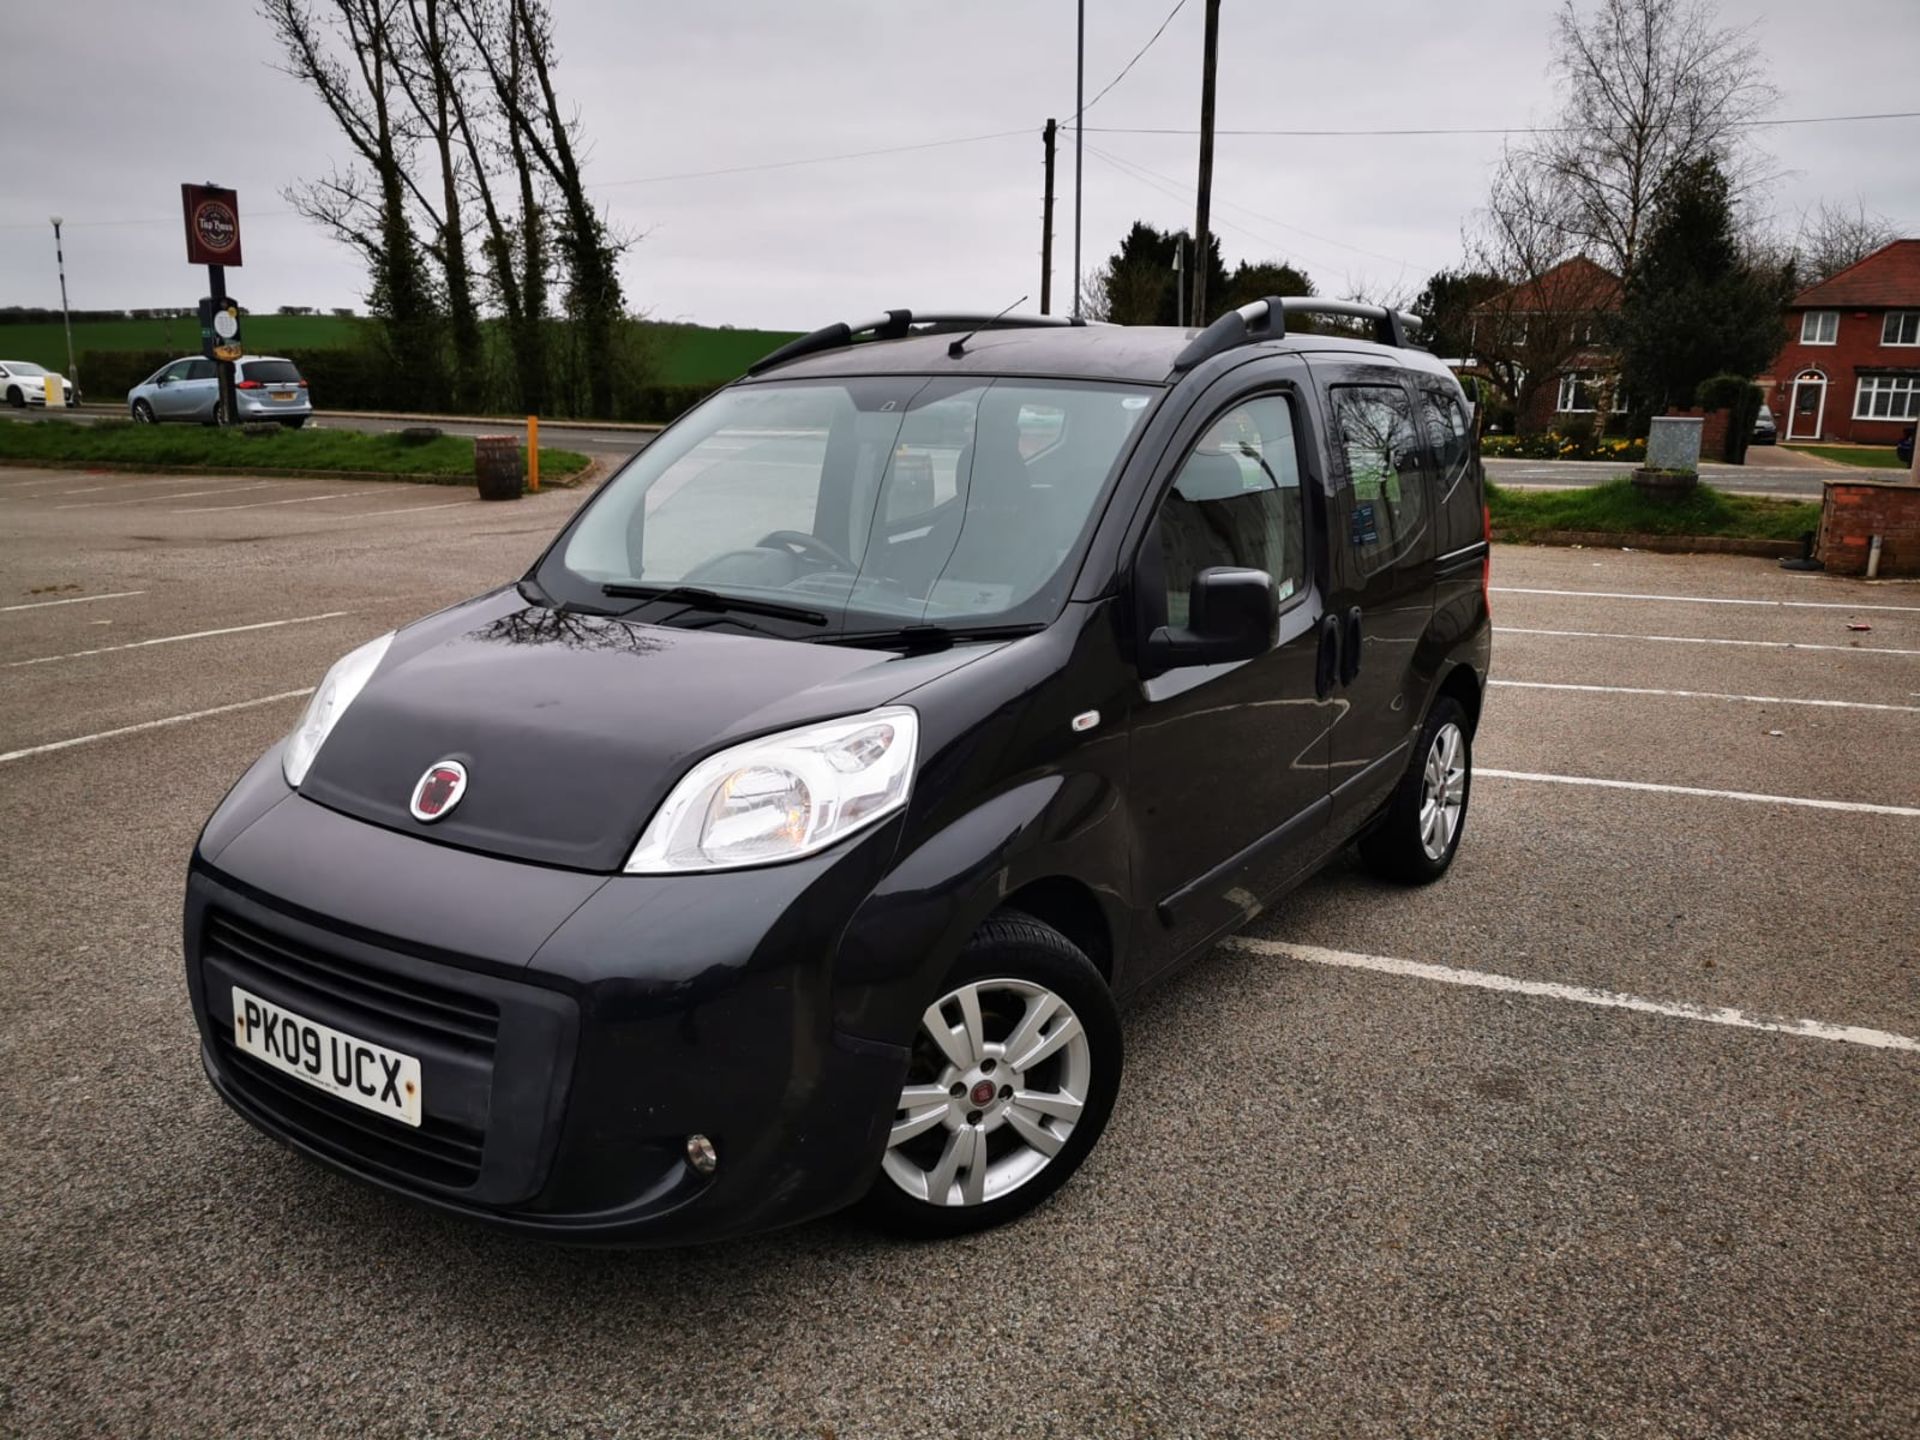 2009 FIAT QUBO DYNAMIN MULTIJET MPV, DIESEL ENGINE, SHOWING 0 PREVIOUS KEEPERS *NO VAT* - Image 4 of 27